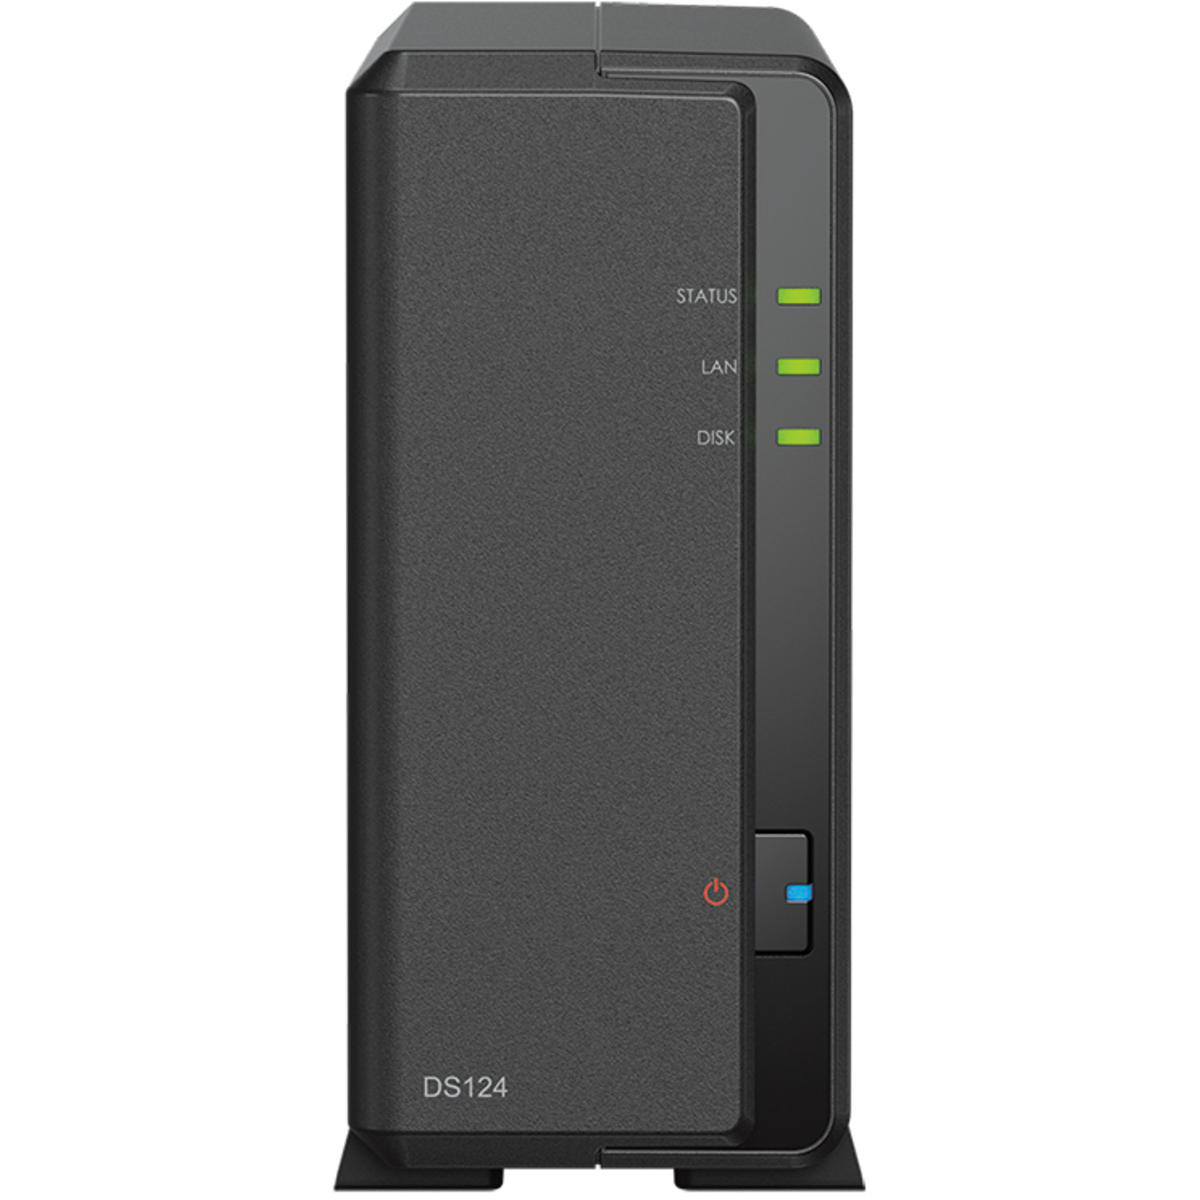 buy $328 Synology DiskStation DS124 2tb Desktop NAS - Network Attached Storage Device 1x2000gb Seagate BarraCuda ST2000DM008 3.5 7200rpm SATA 6Gb/s HDD CONSUMER Class Drives Installed - Burn-In Tested - nas headquarters buy network attached storage server device das new raid-5 free shipping simply usa DiskStation DS124